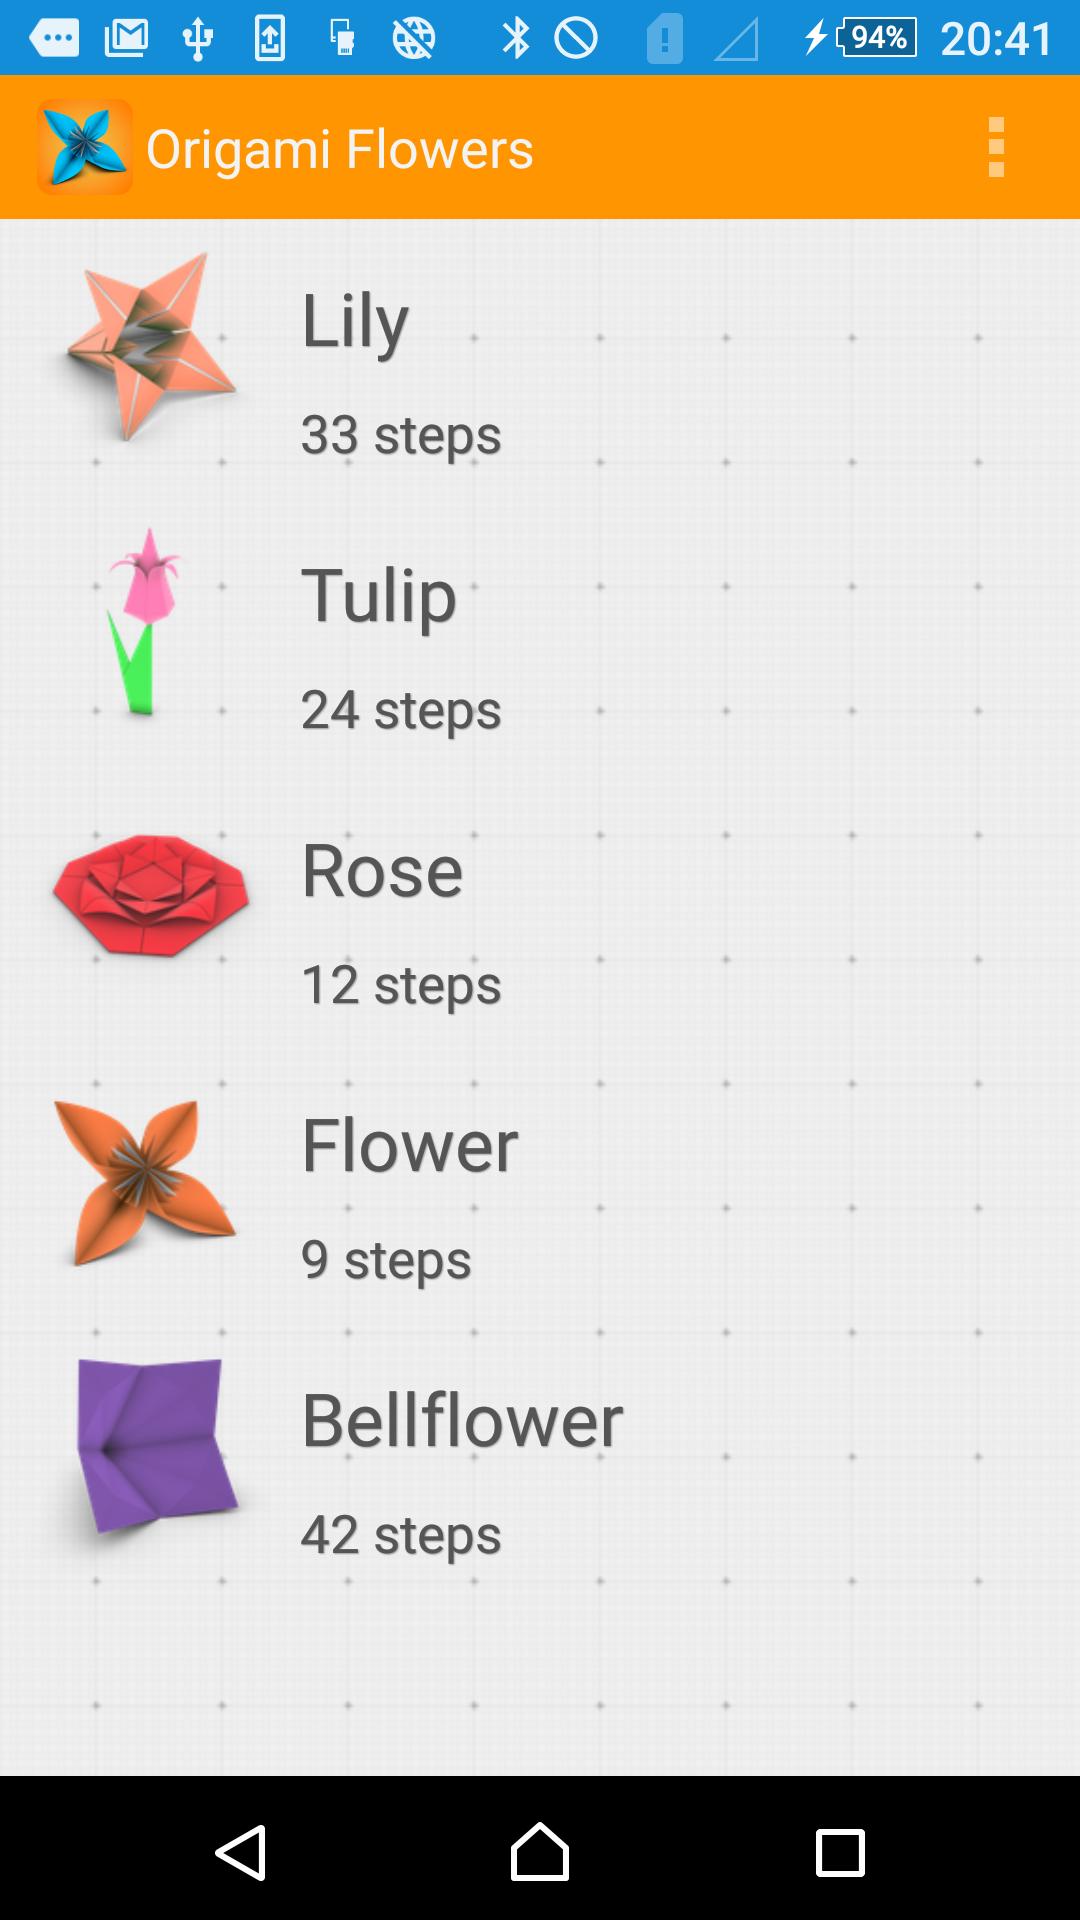 Origami Flower Instructions 3d For Android Apk Download